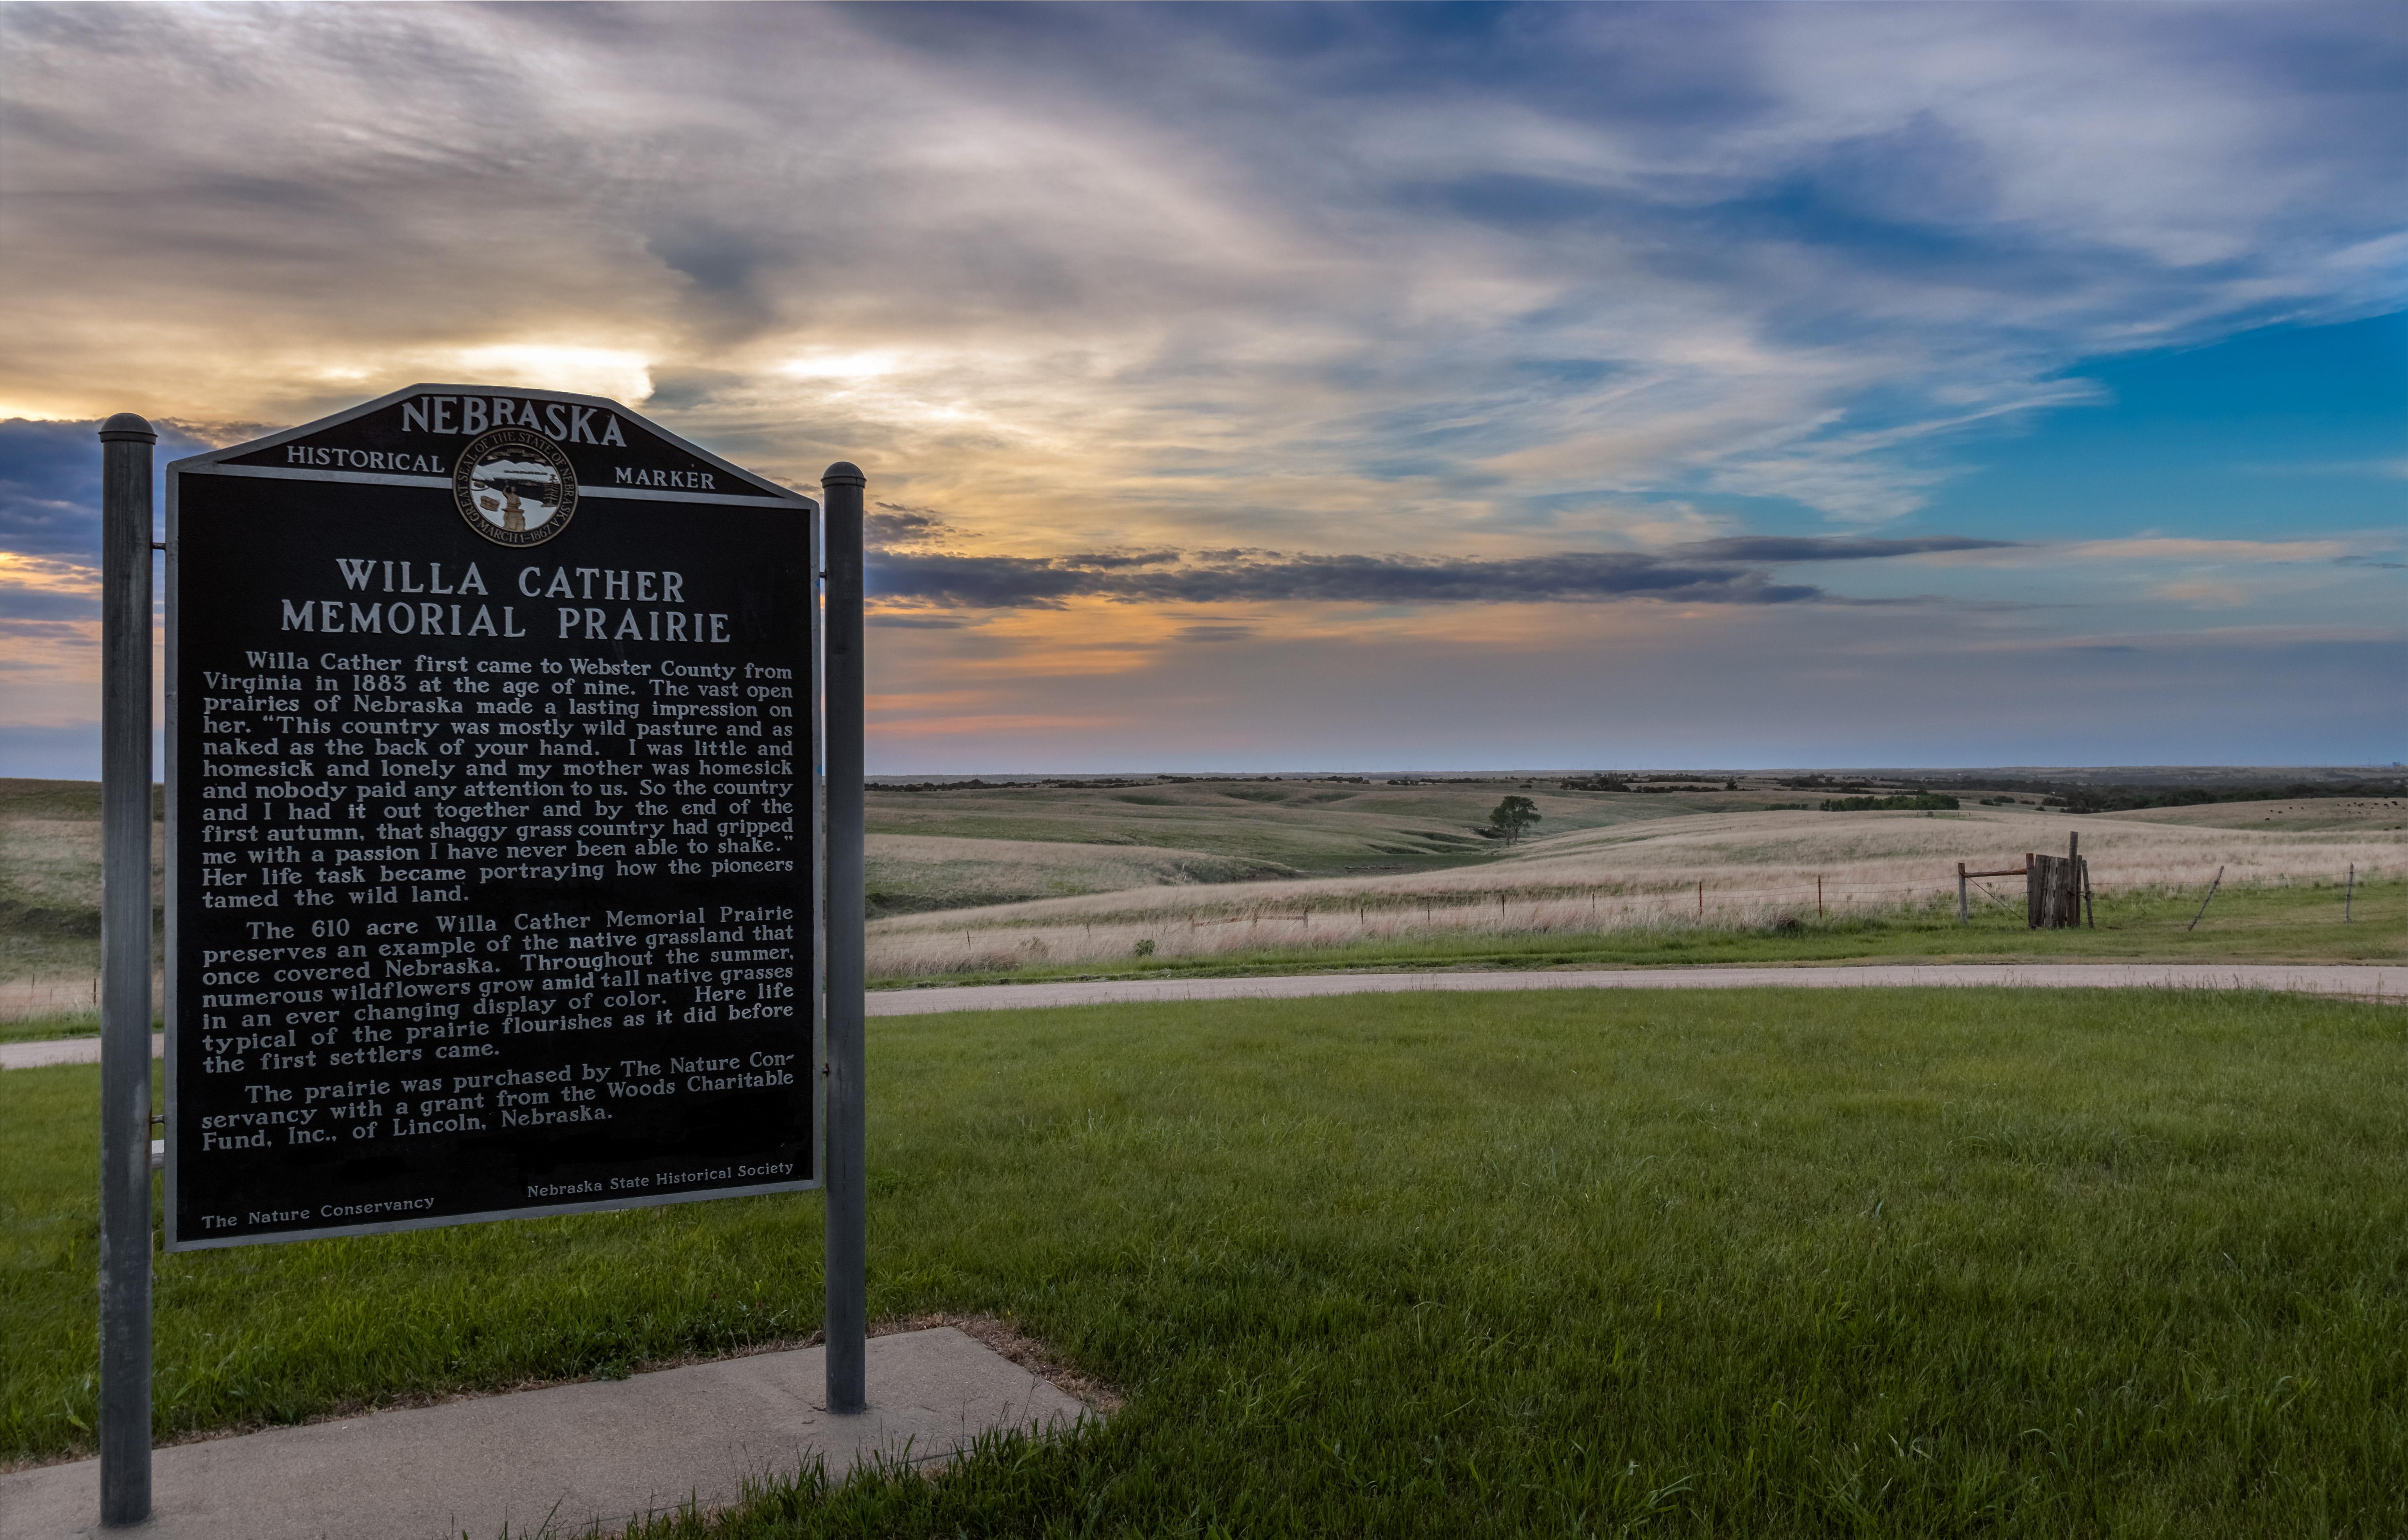 Photo of the Willa Cather Memorial Prairie